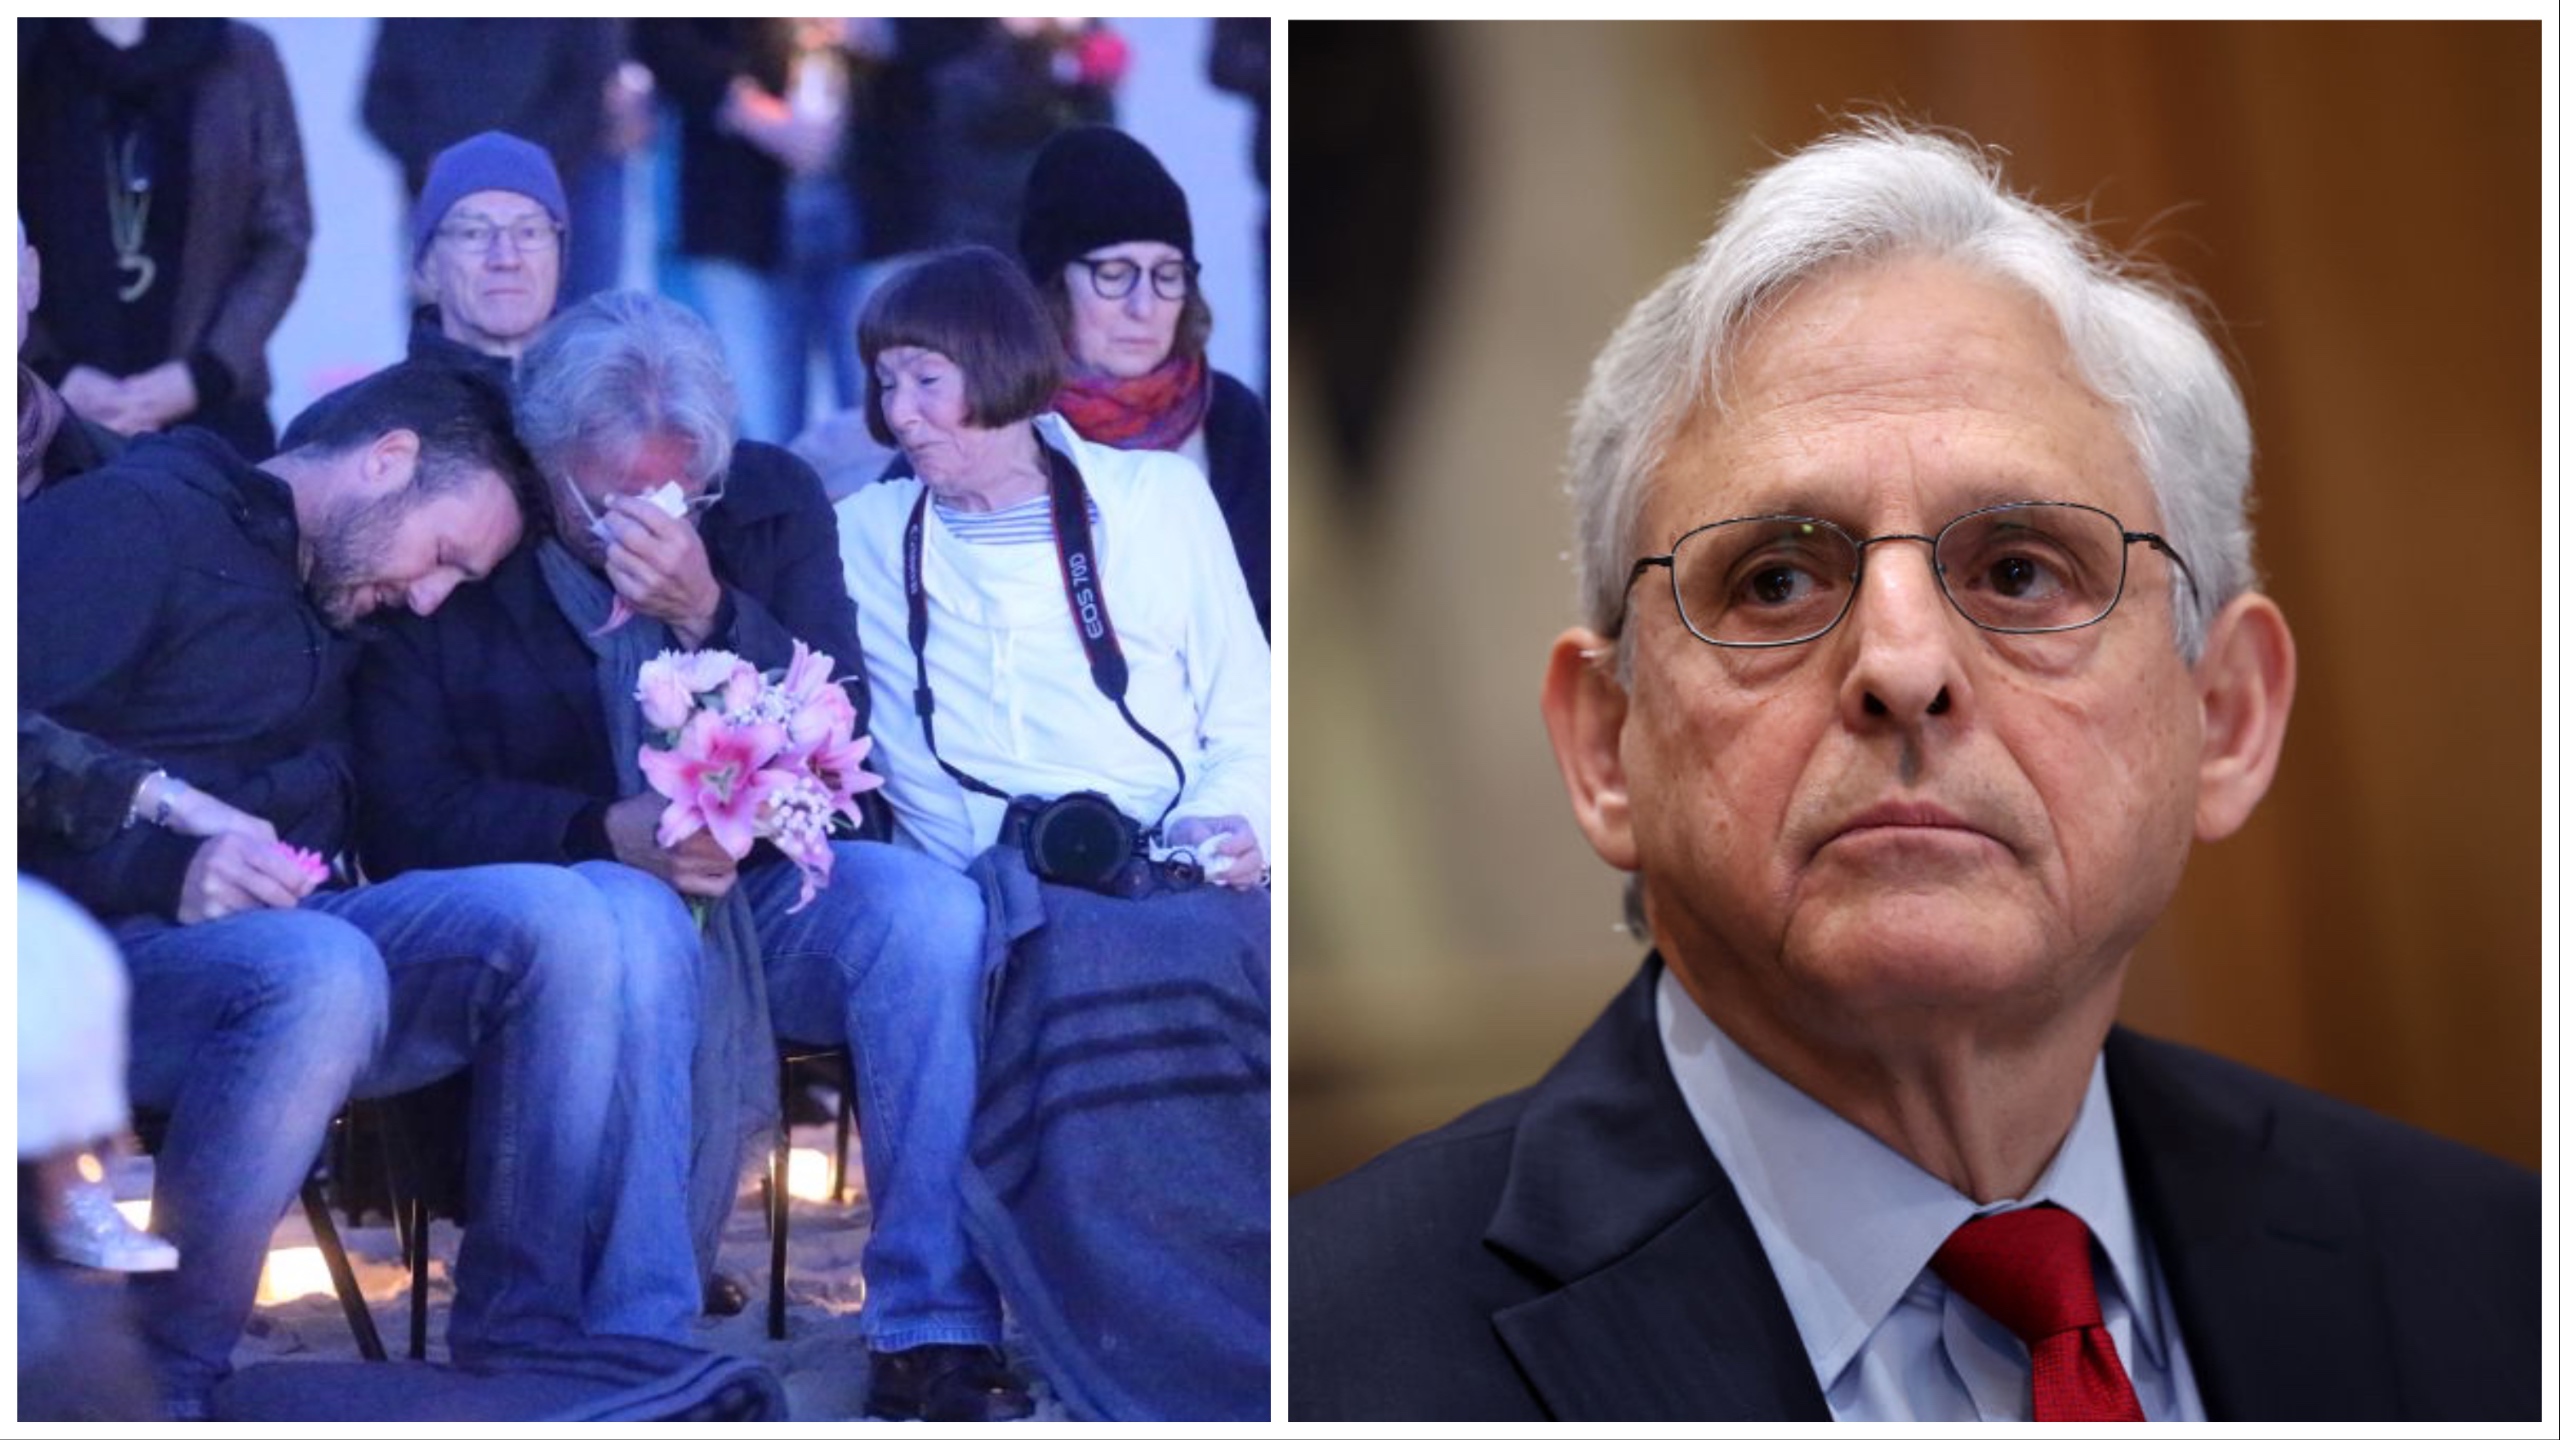 Garland condemns racism, excessive force in Minneapolis police, omits victim’s race.